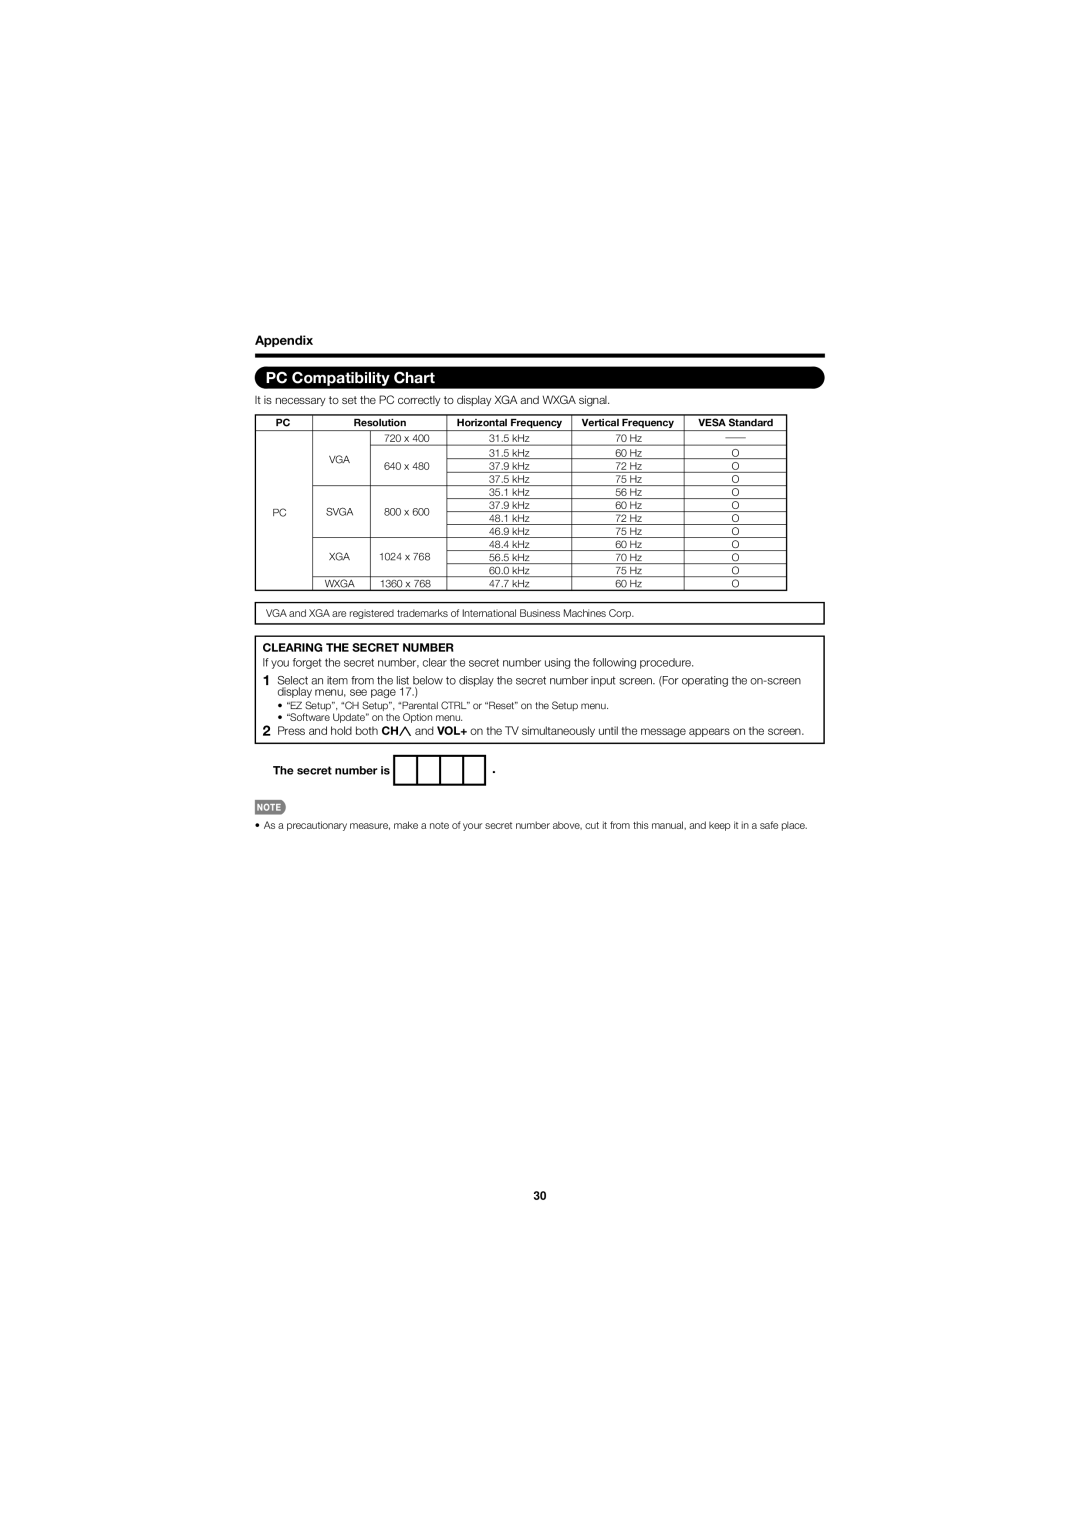 Sharp LC32D47UT PC Compatibility Chart, Clearing The Secret Number, The secret number is, Resolution, Horizontal Frequency 